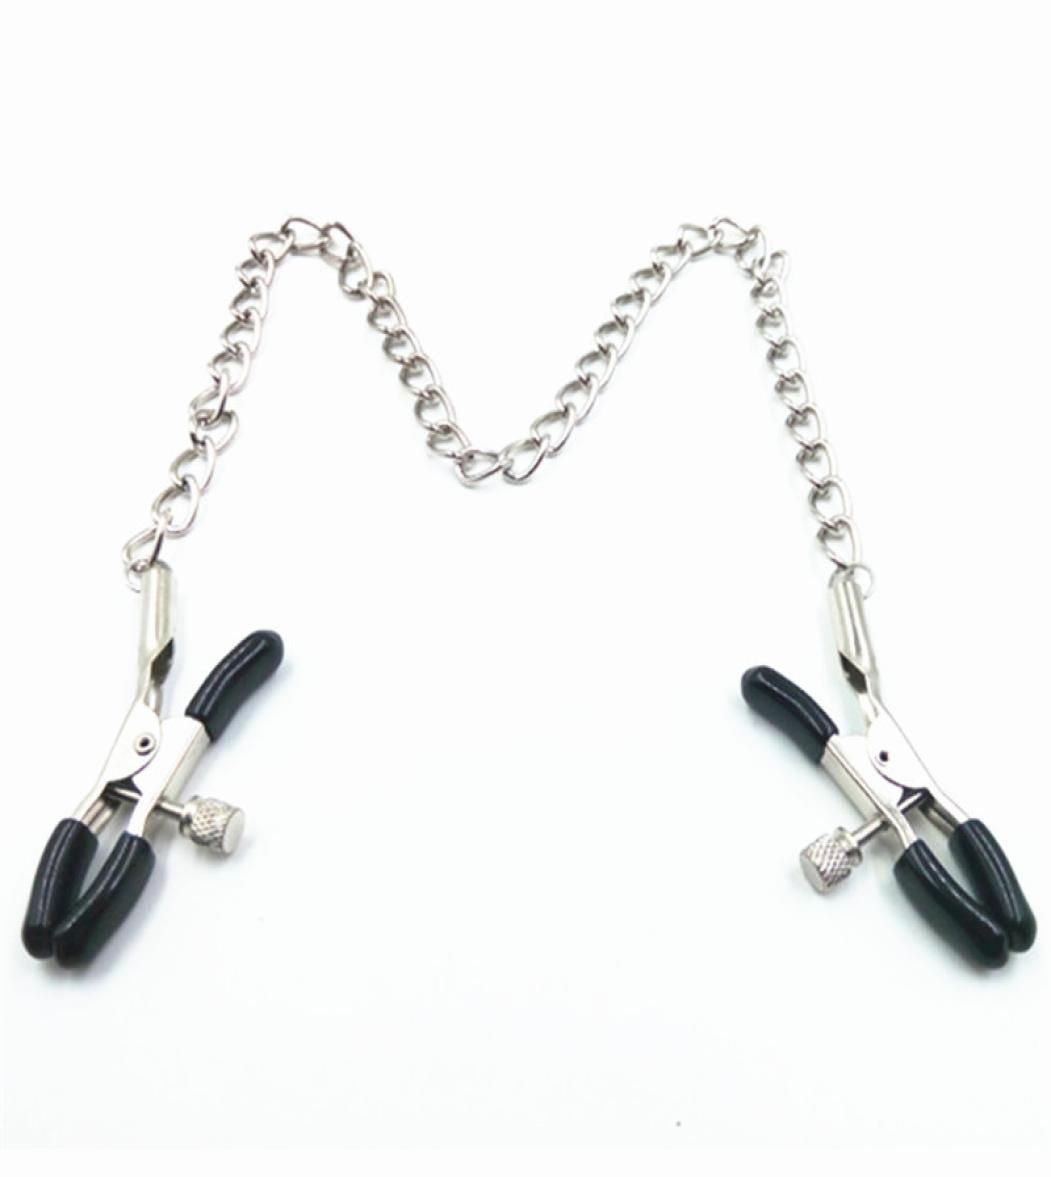 Anniv Coupon Below Chained Nipple Clips Clamps Tits Stimulation Teaser BDSM Bondage Adult Products Fetish Fantasies Play Sex Toys For Amateur Mature 7908710 From Nokg, $9.25 DHgate